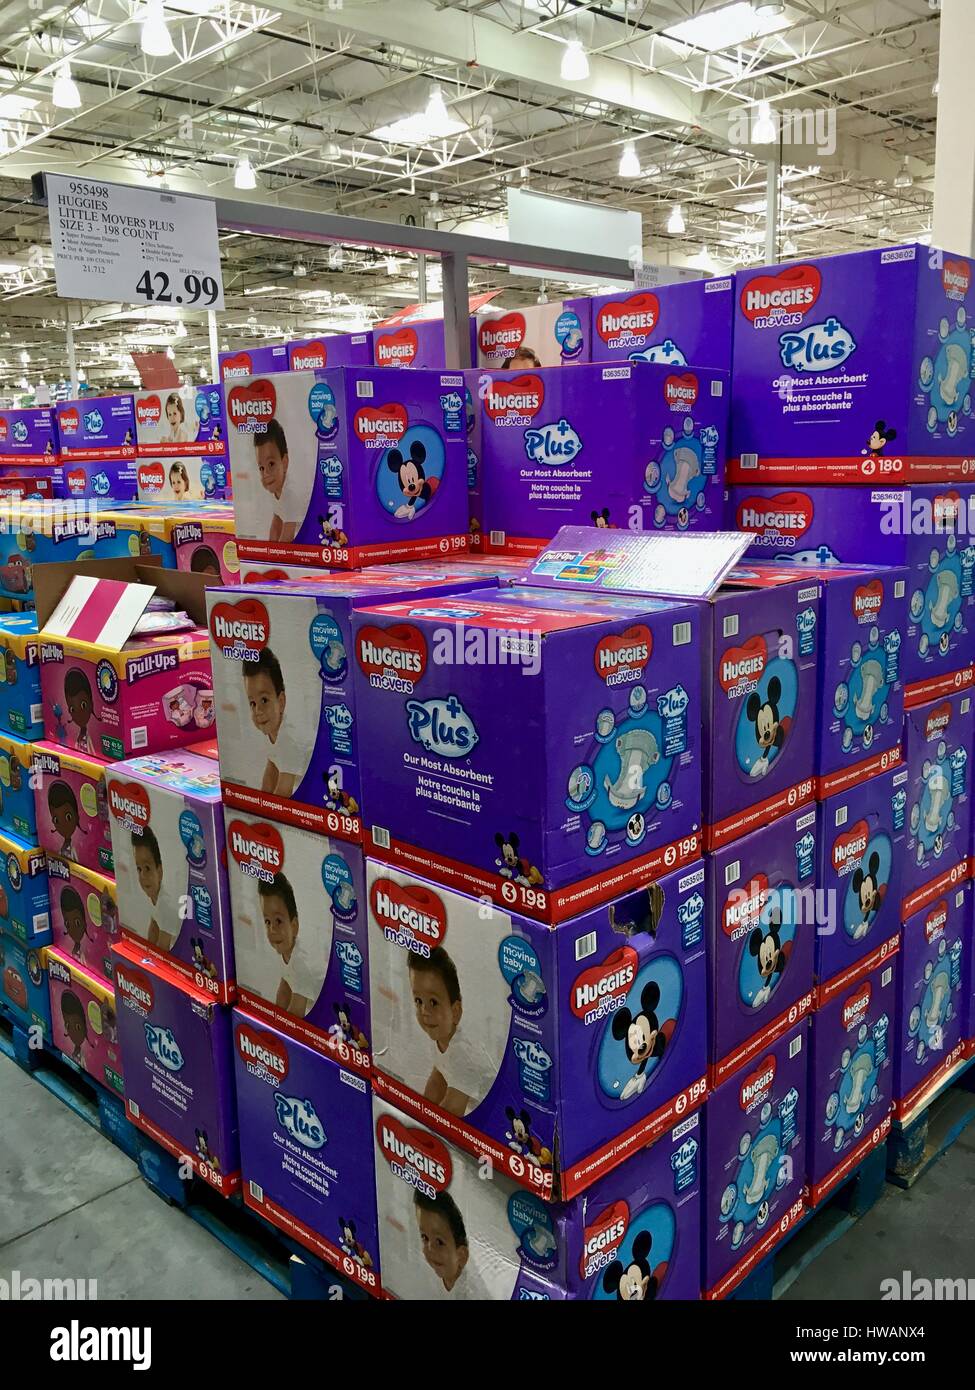 Diapers for sale displayed in the Costco warehouse Stock Photo Alamy